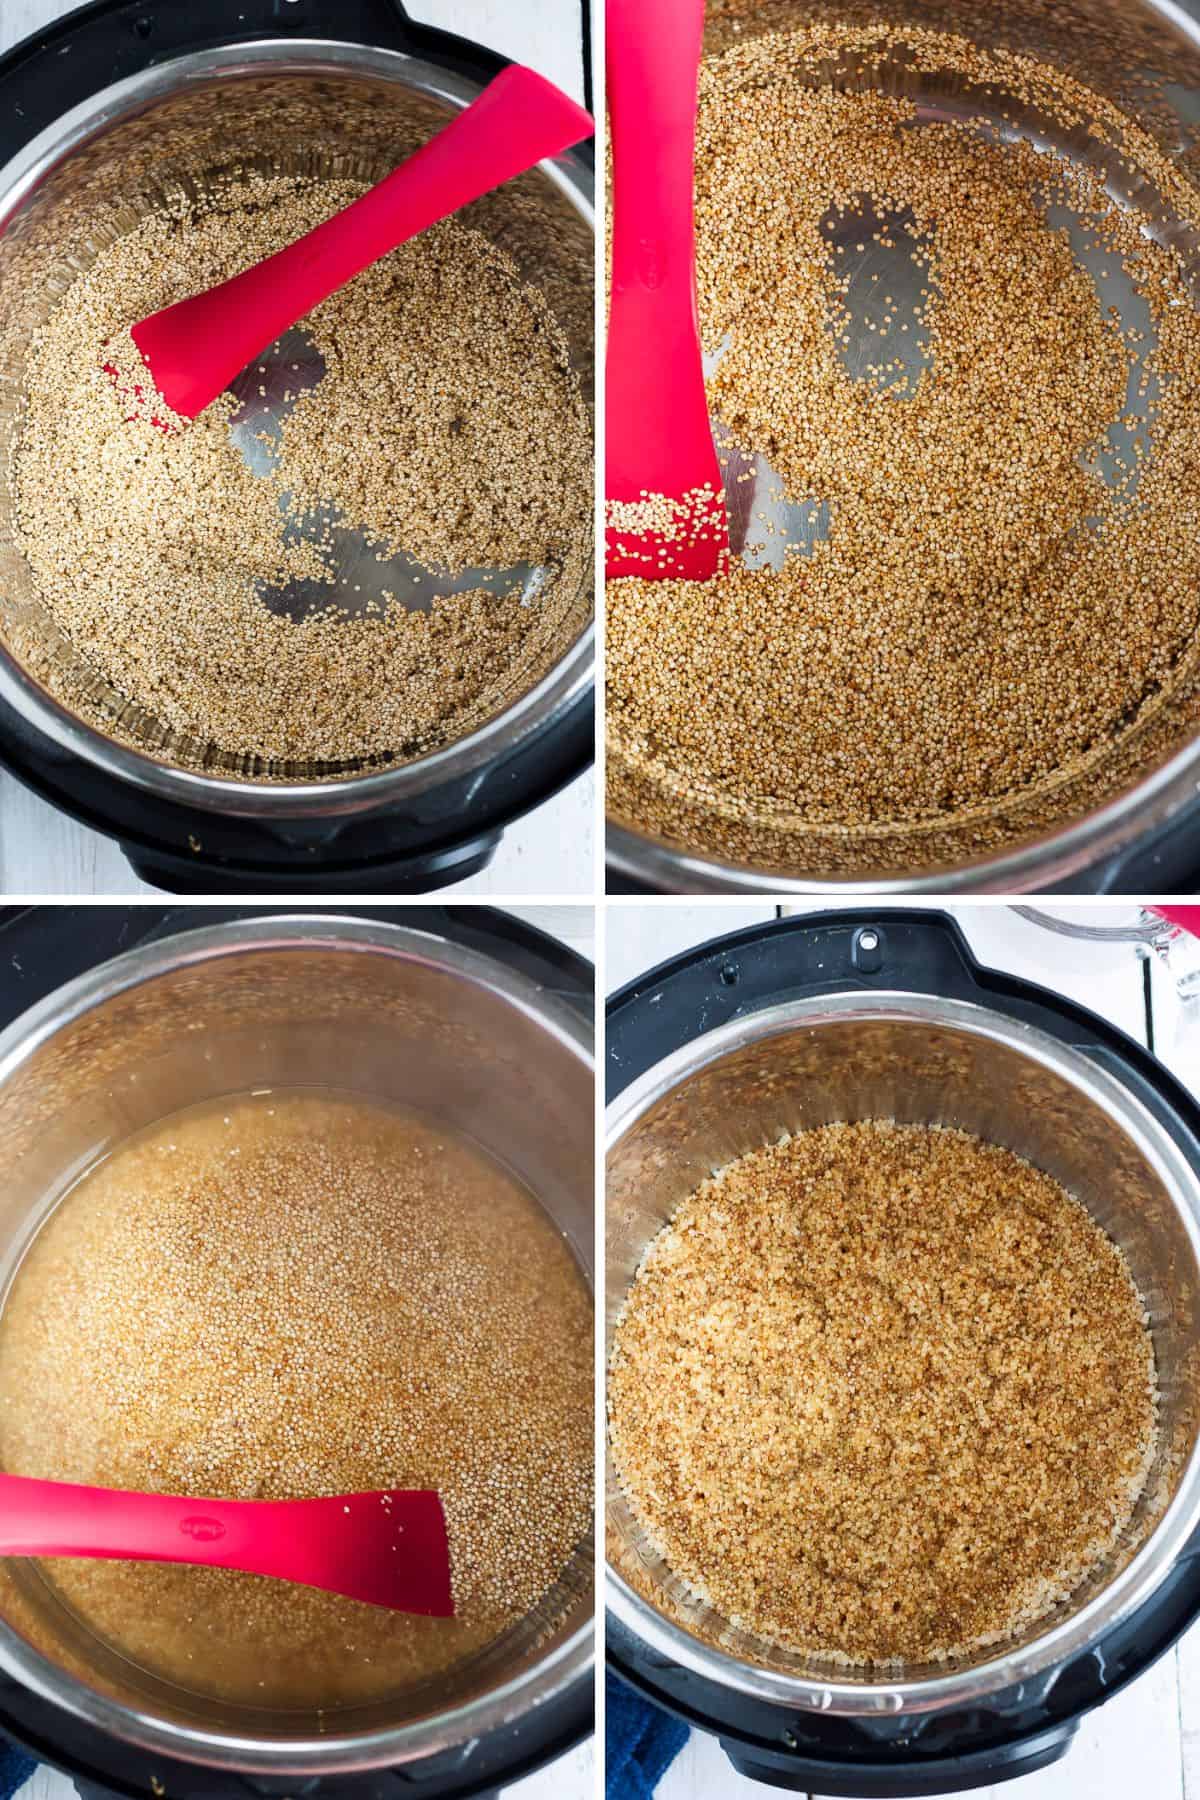 4 photos showing the process of making quinoa in a pressure cooker.